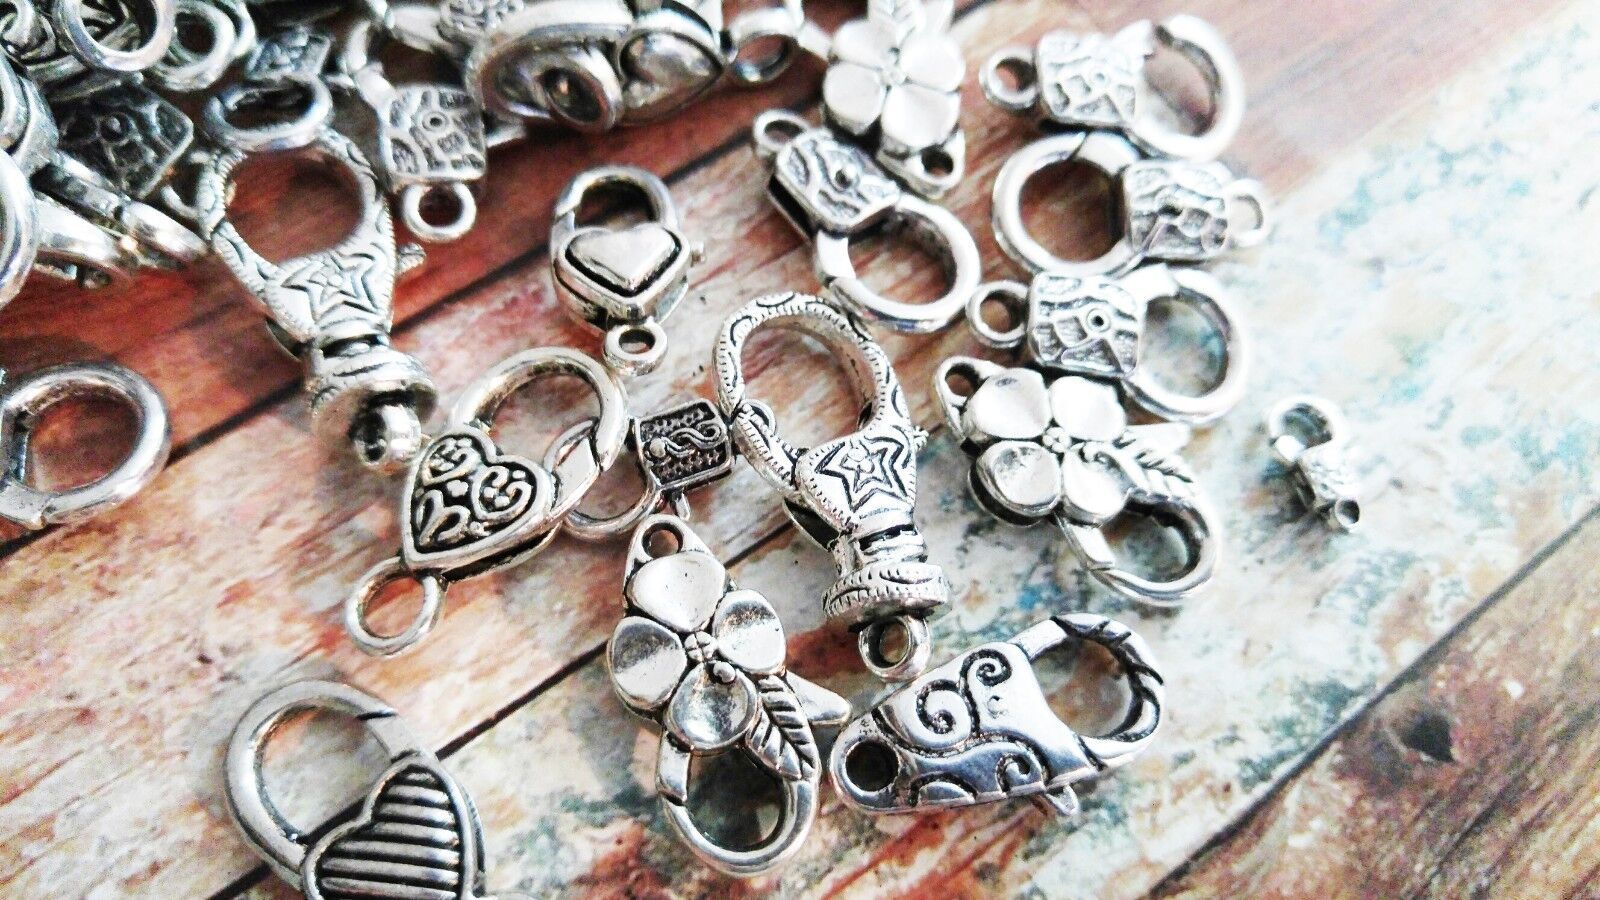 10 Large Lobster Clasps Antiqued Silver Assorted Lot Findings Jewelry Making